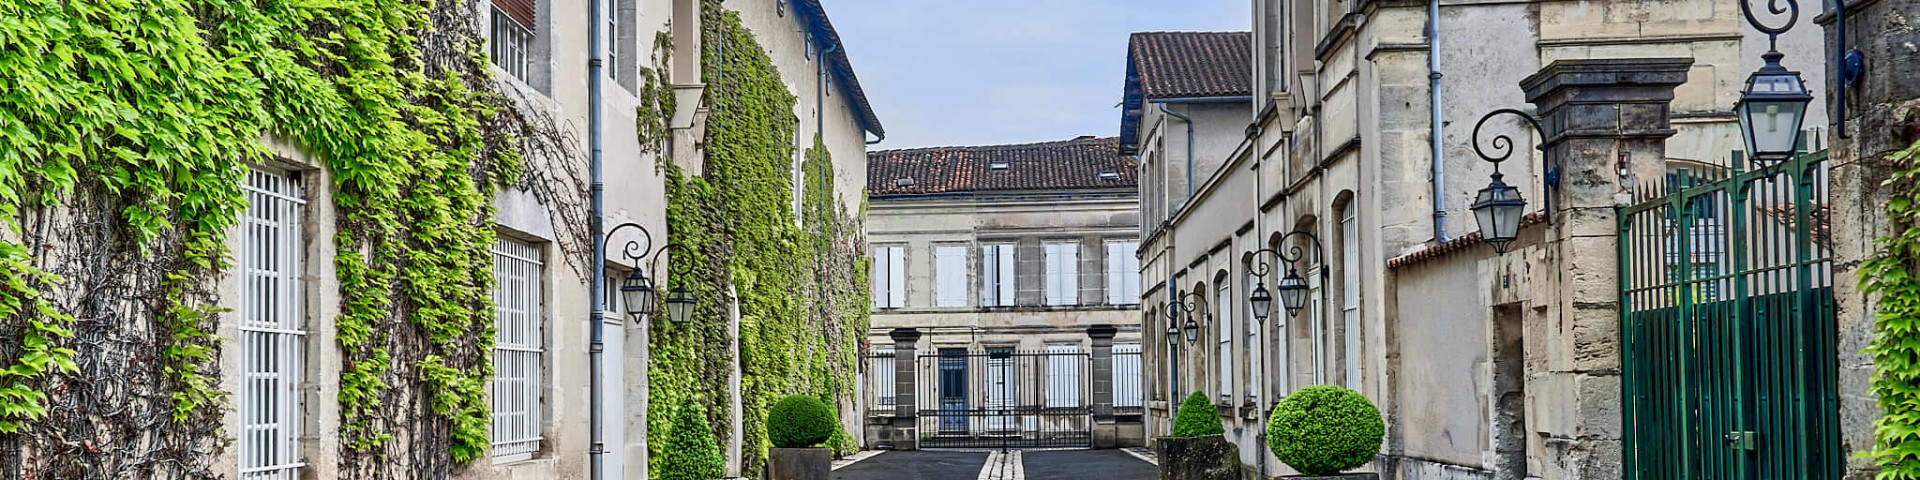 Remy Martin Old House in the Town of Cognac, France